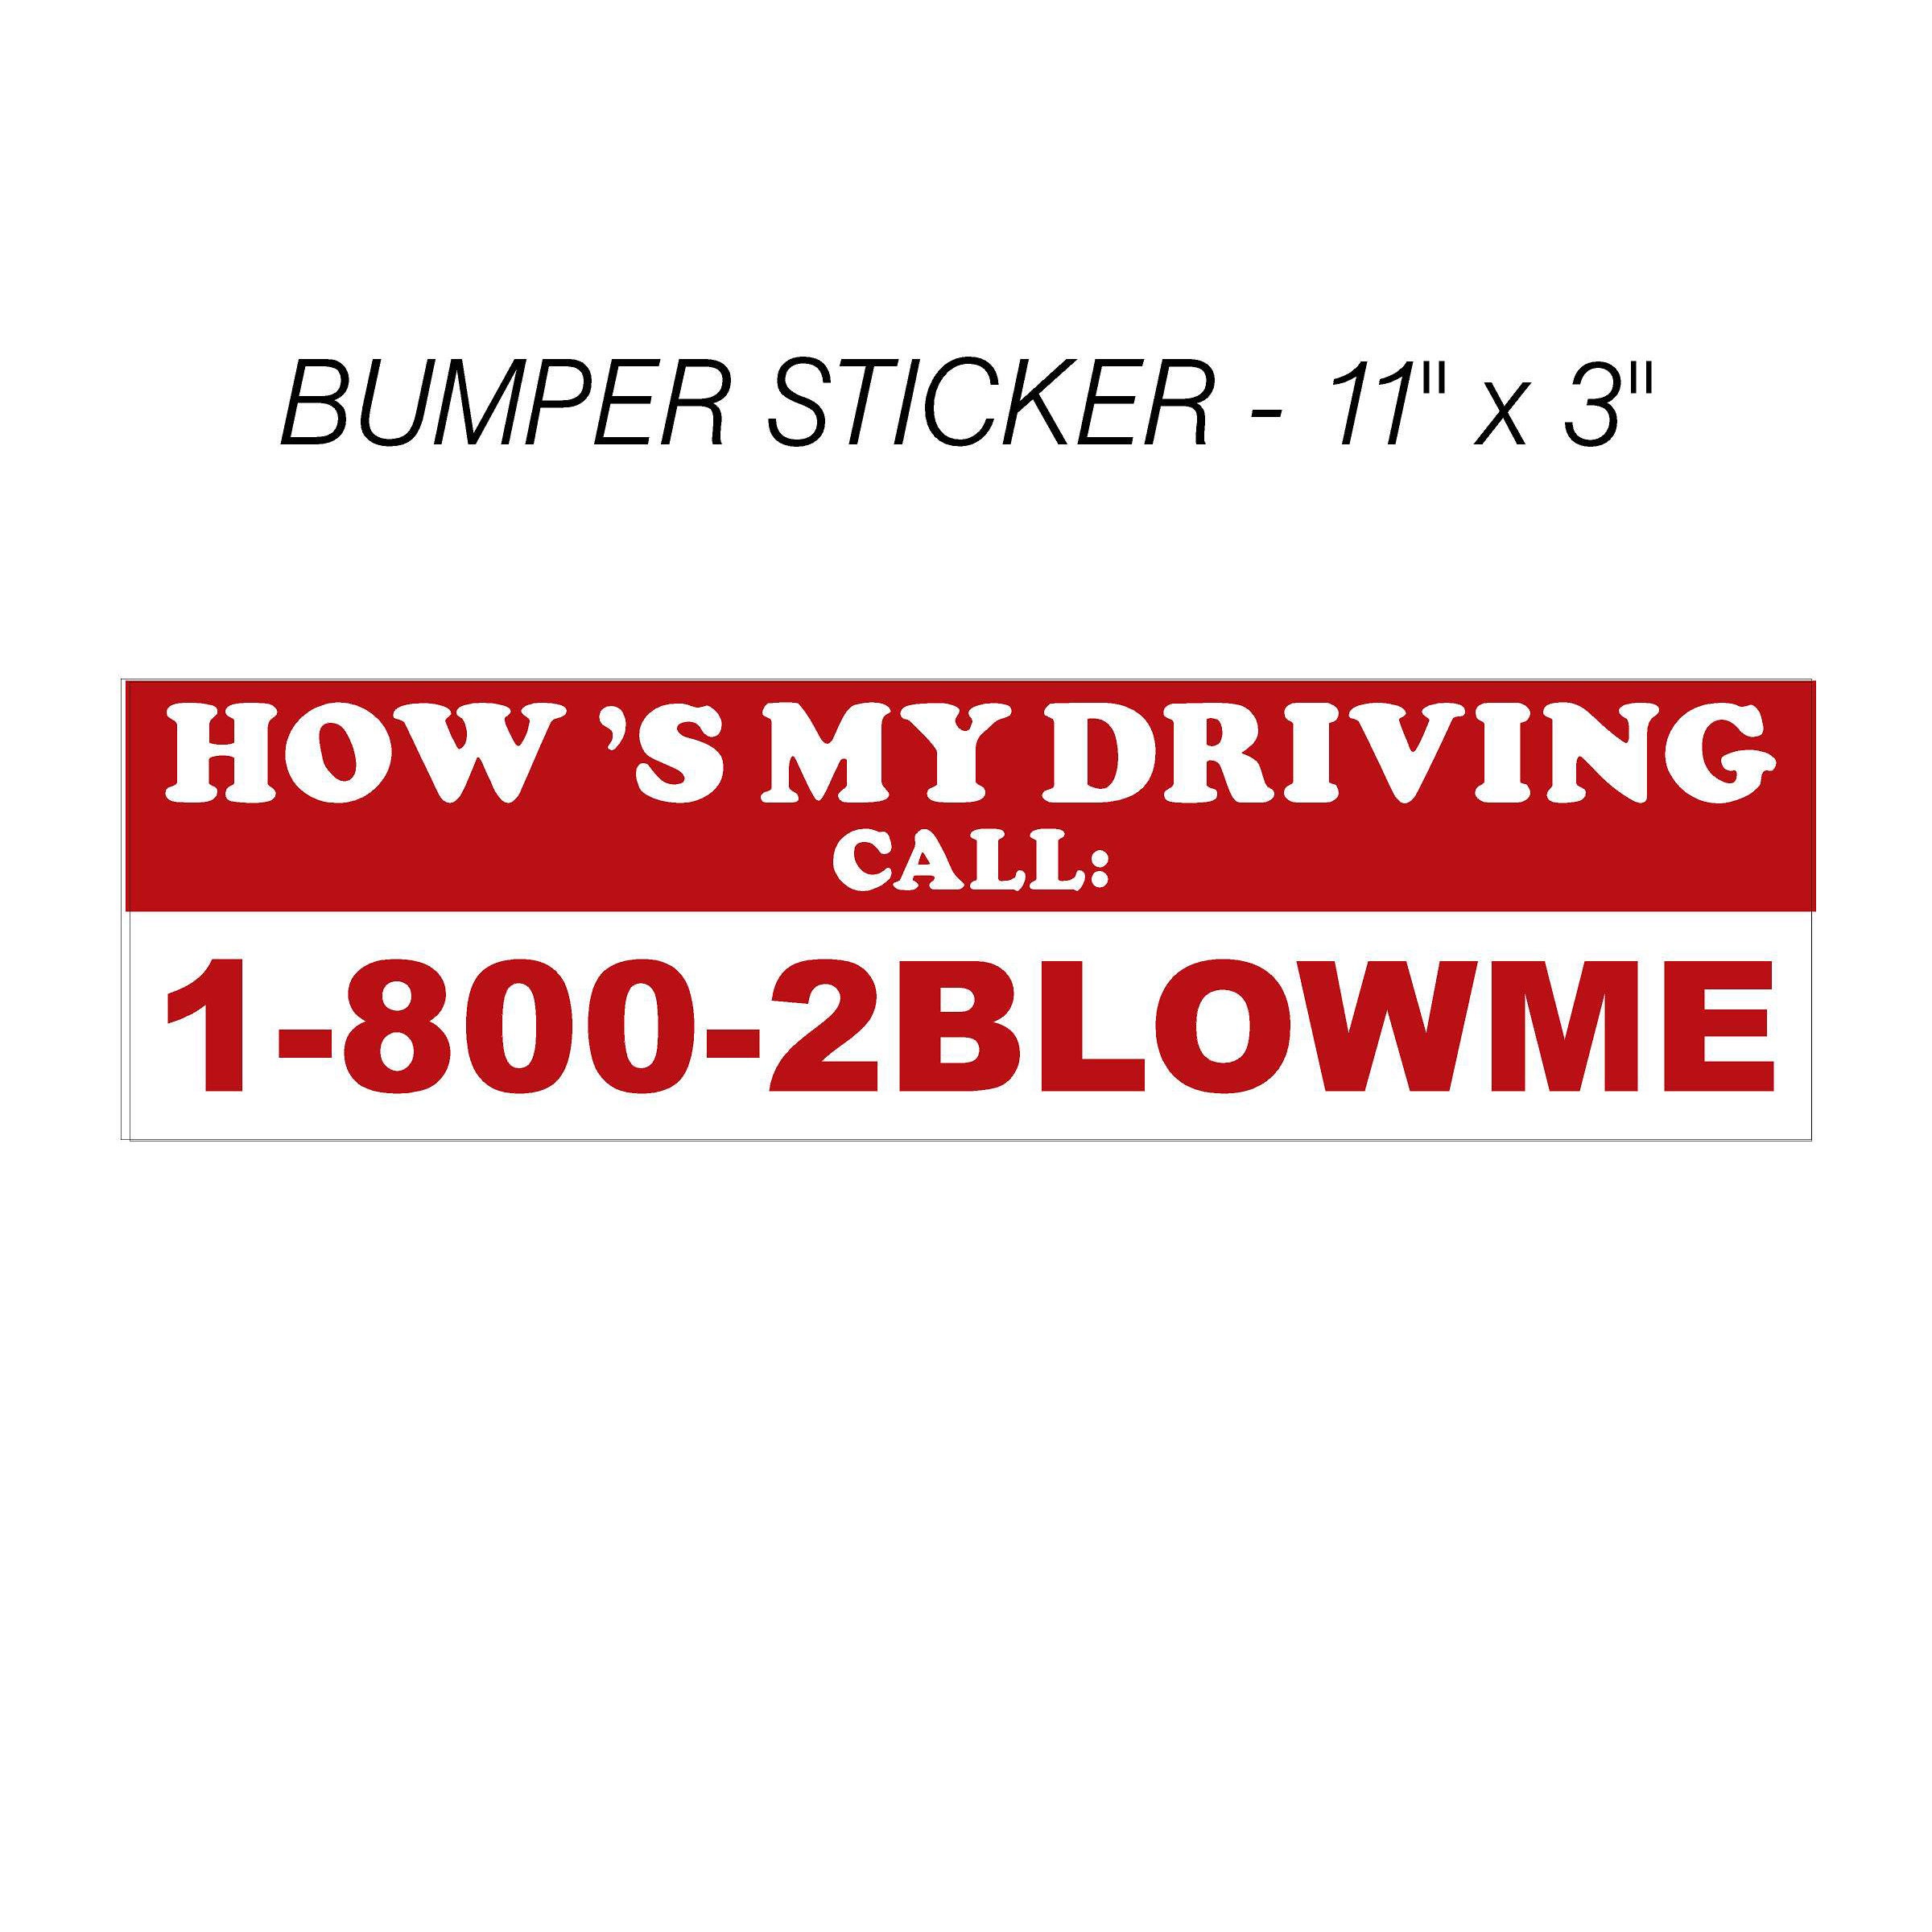 Rickroll How's My Driving Prank Call Number | Sticker